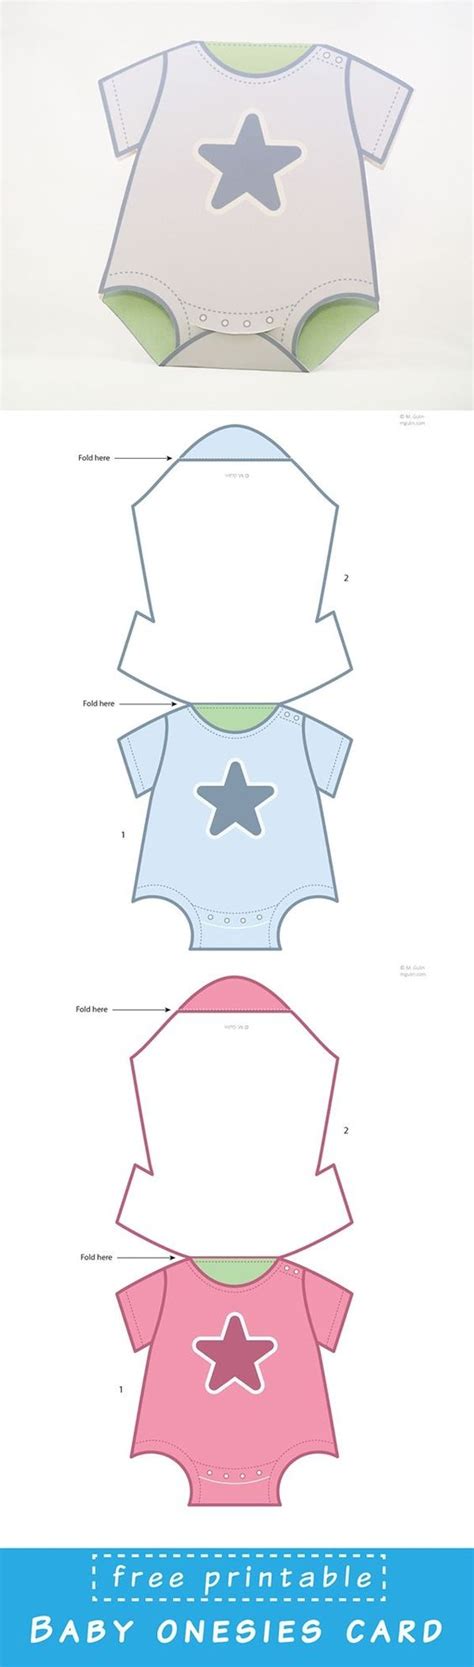 printable baby onesies card template  dowload  assemble